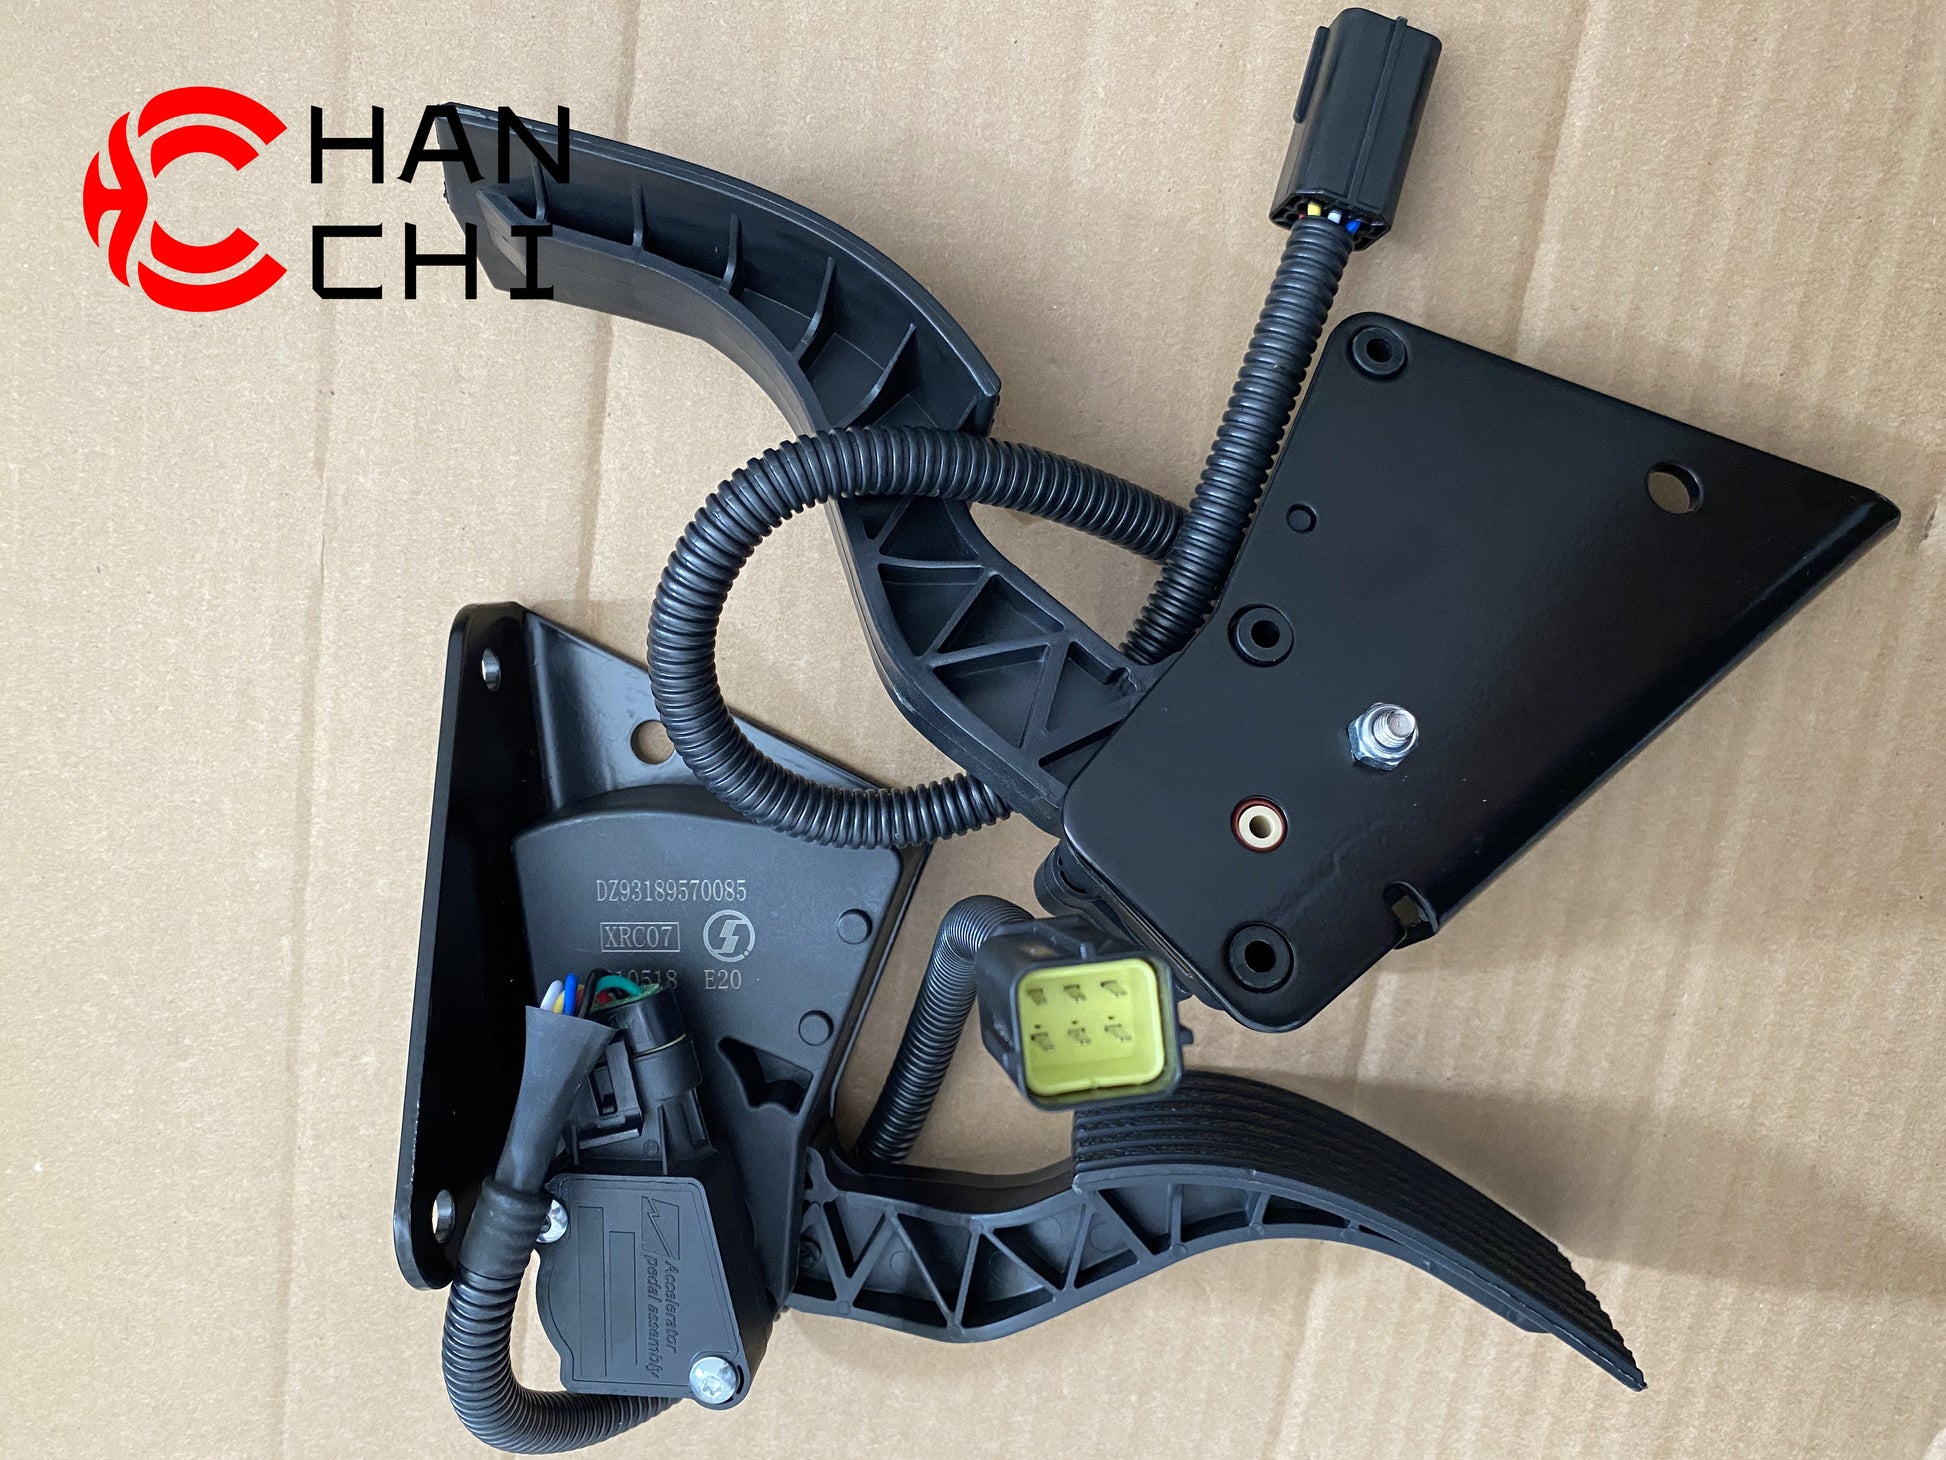 【Description】---☀Welcome to HANCHI☀---✔Good Quality✔Generally Applicability✔Competitive PriceEnjoy your shopping time↖（^ω^）↗【Features】Brand-New with High Quality for the Aftermarket.Totally mathced your need.**Stable Quality**High Precision**Easy Installation**【Specification】OEM：DZ93189570085Material：ABSColor：blackOrigin：Made in ChinaWeight：1000g【Packing List】1* Electronic Accelerator Pedal 【More Service】 We can provide OEM service We can Be your one-step solution for Auto Parts We can provide t